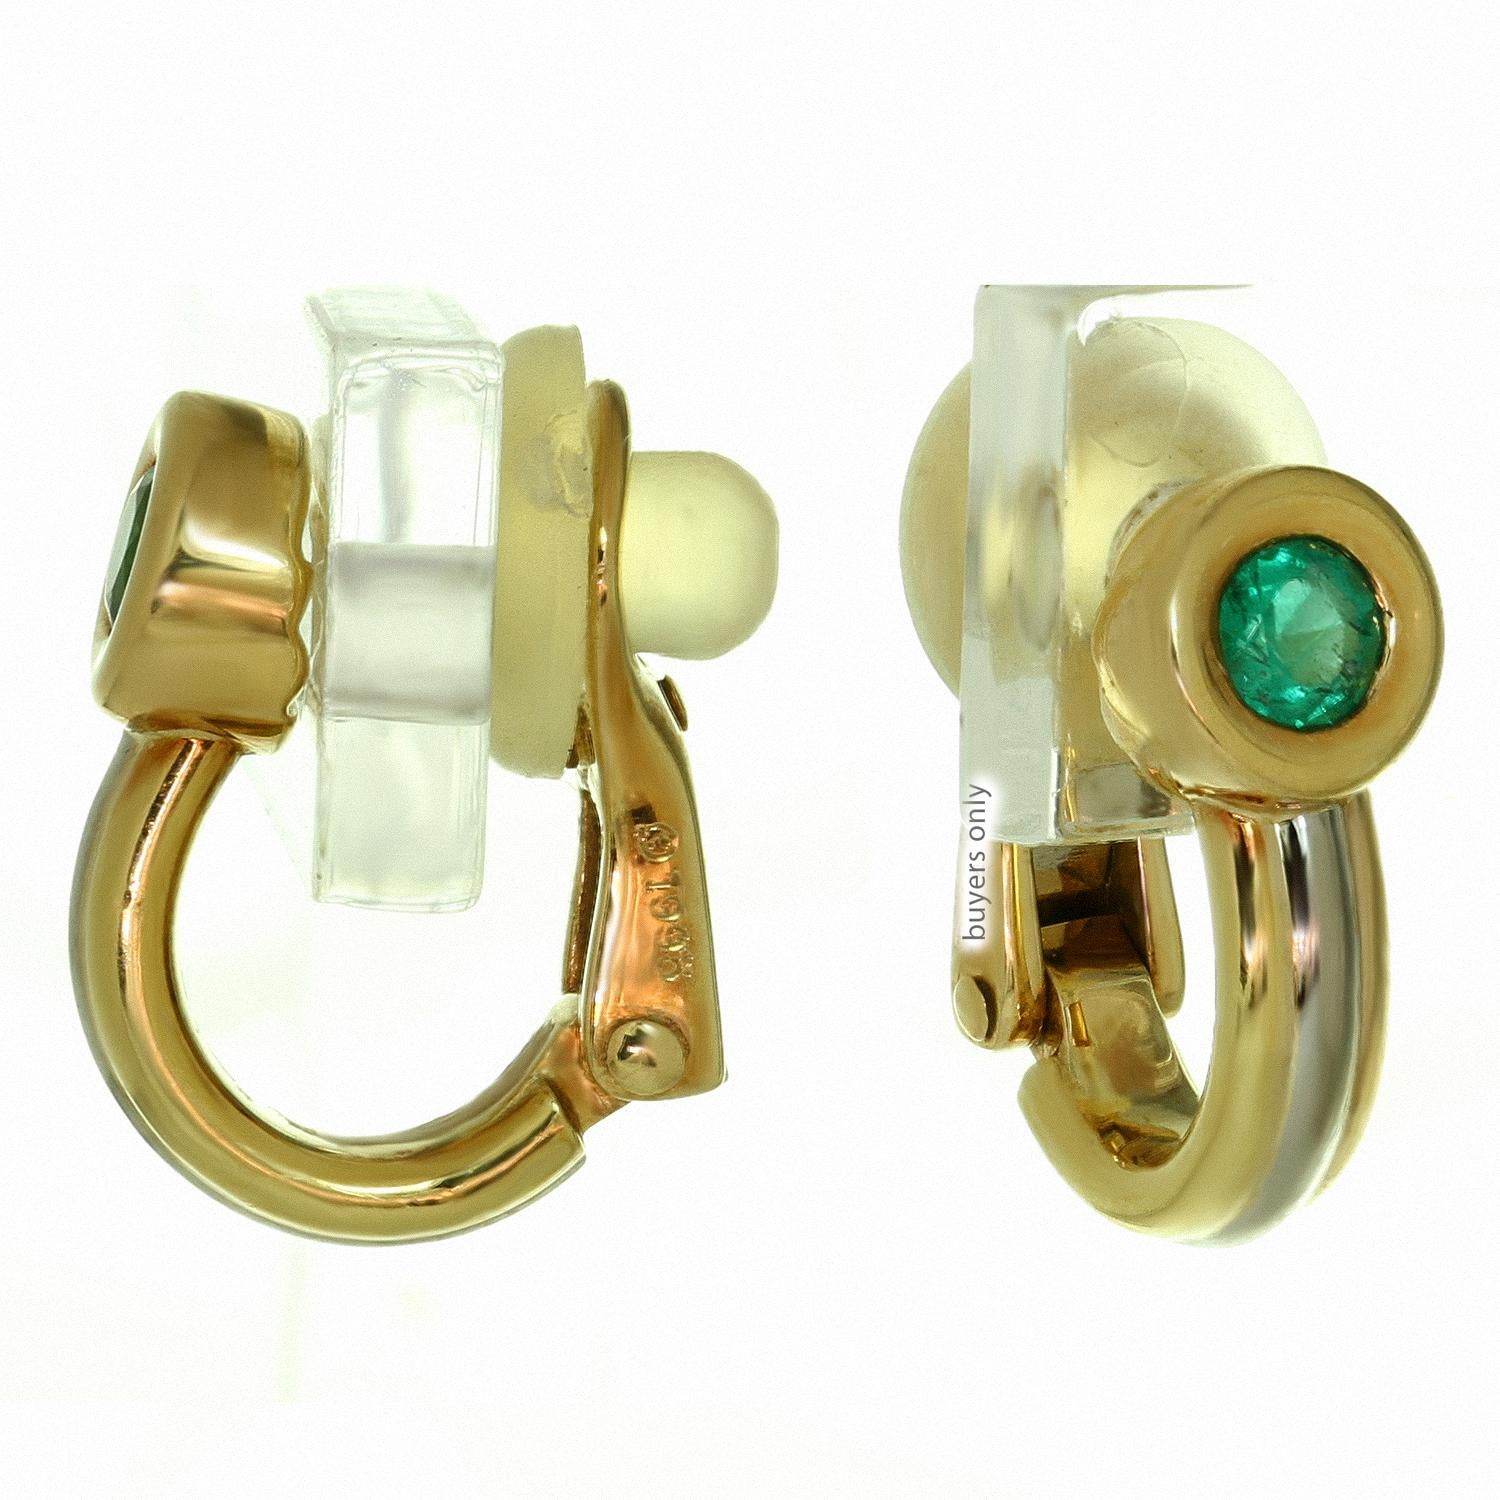 These gorgeous Cartier earrings from the classic Trinity collection are crafted in 18k yellow, white, and rose gold and set with round faceted sparkling bright green emeralds. Made in France circa 1980s. Measurements: 0.23